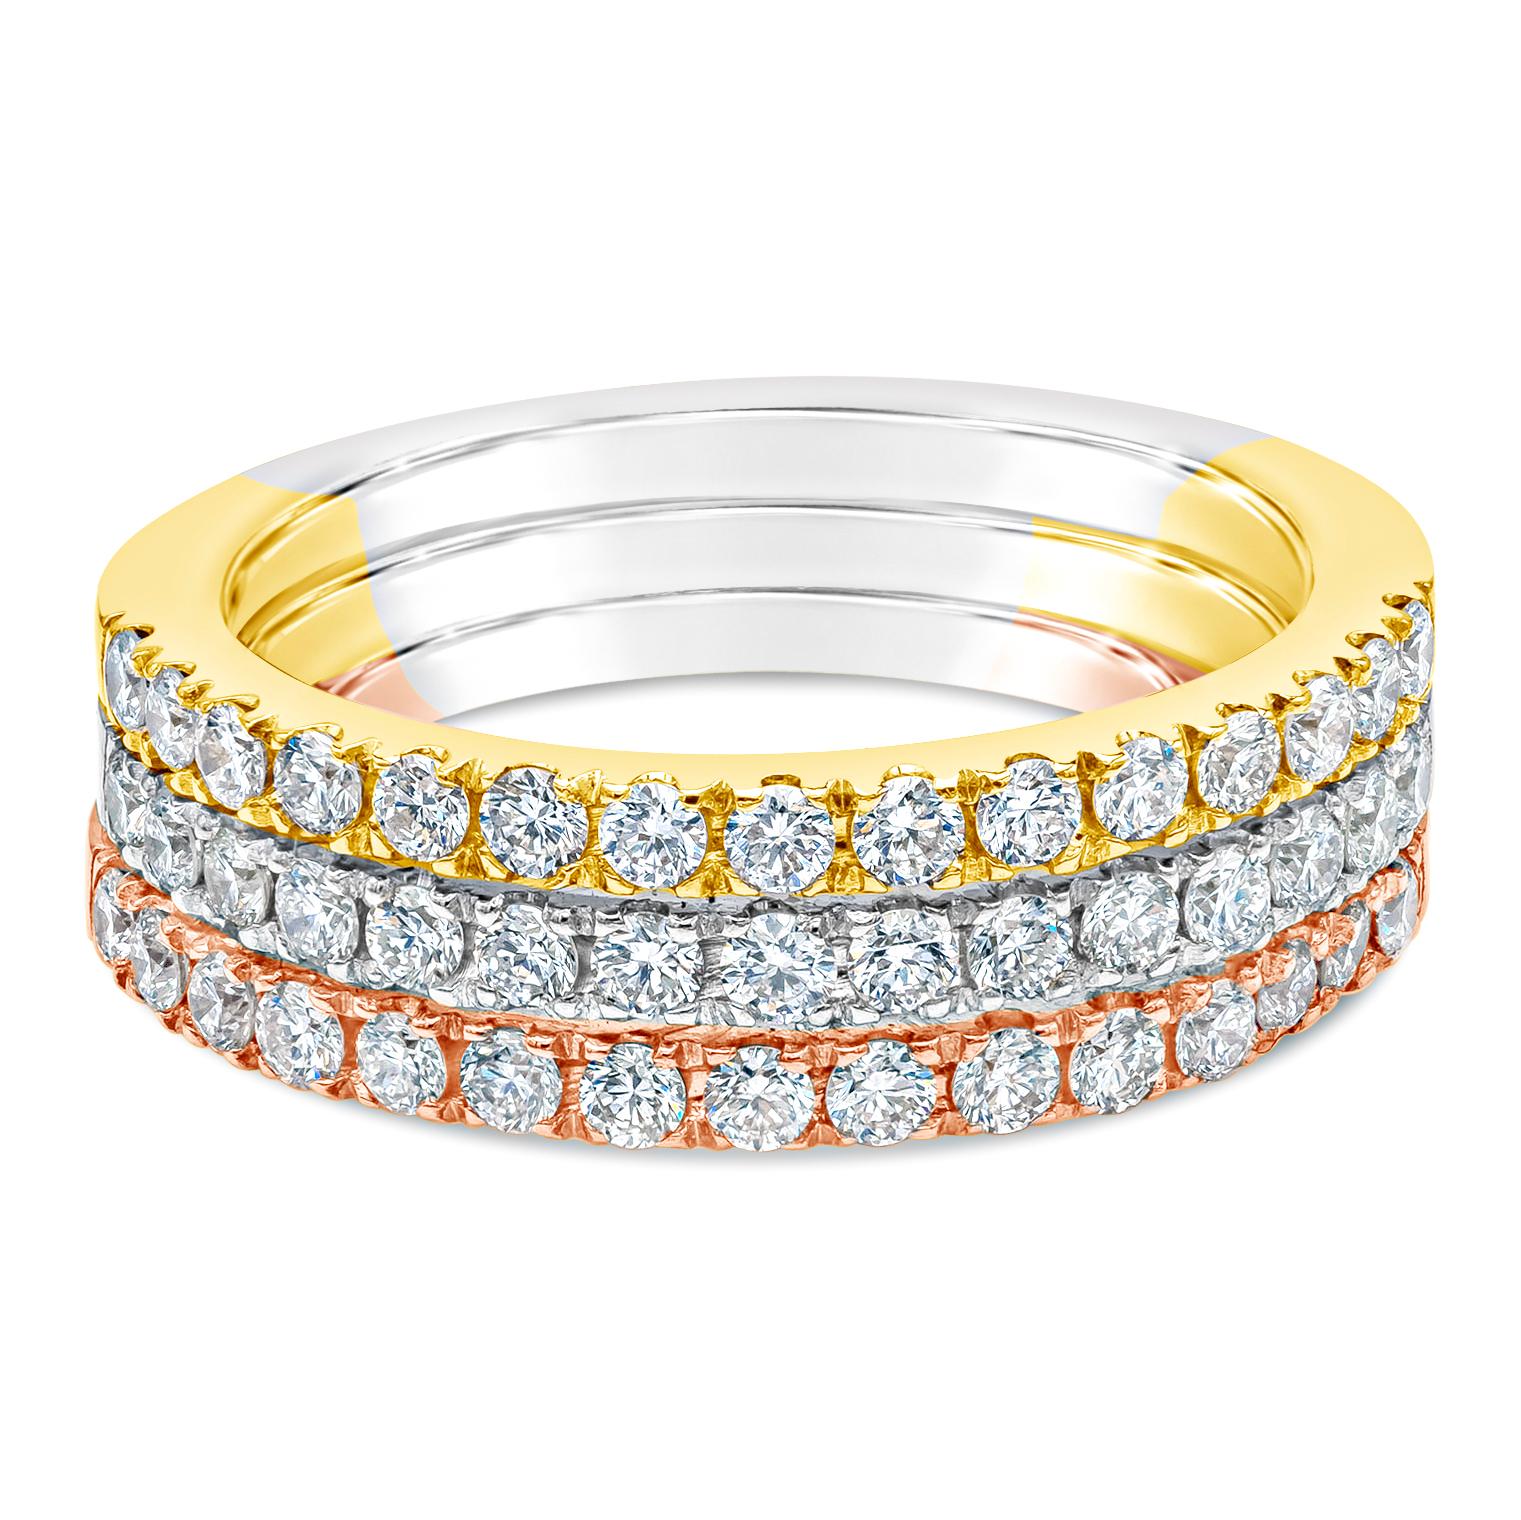 A fashionable wedding band showcasing three stacked rings set half-way with round brilliant diamonds weighing 1.01 carats total, F Color and VS in Clarity. Made with 14K Tri-Color Yellow, White and Rose Gold. Size 7 US.

Roman Malakov is a custom